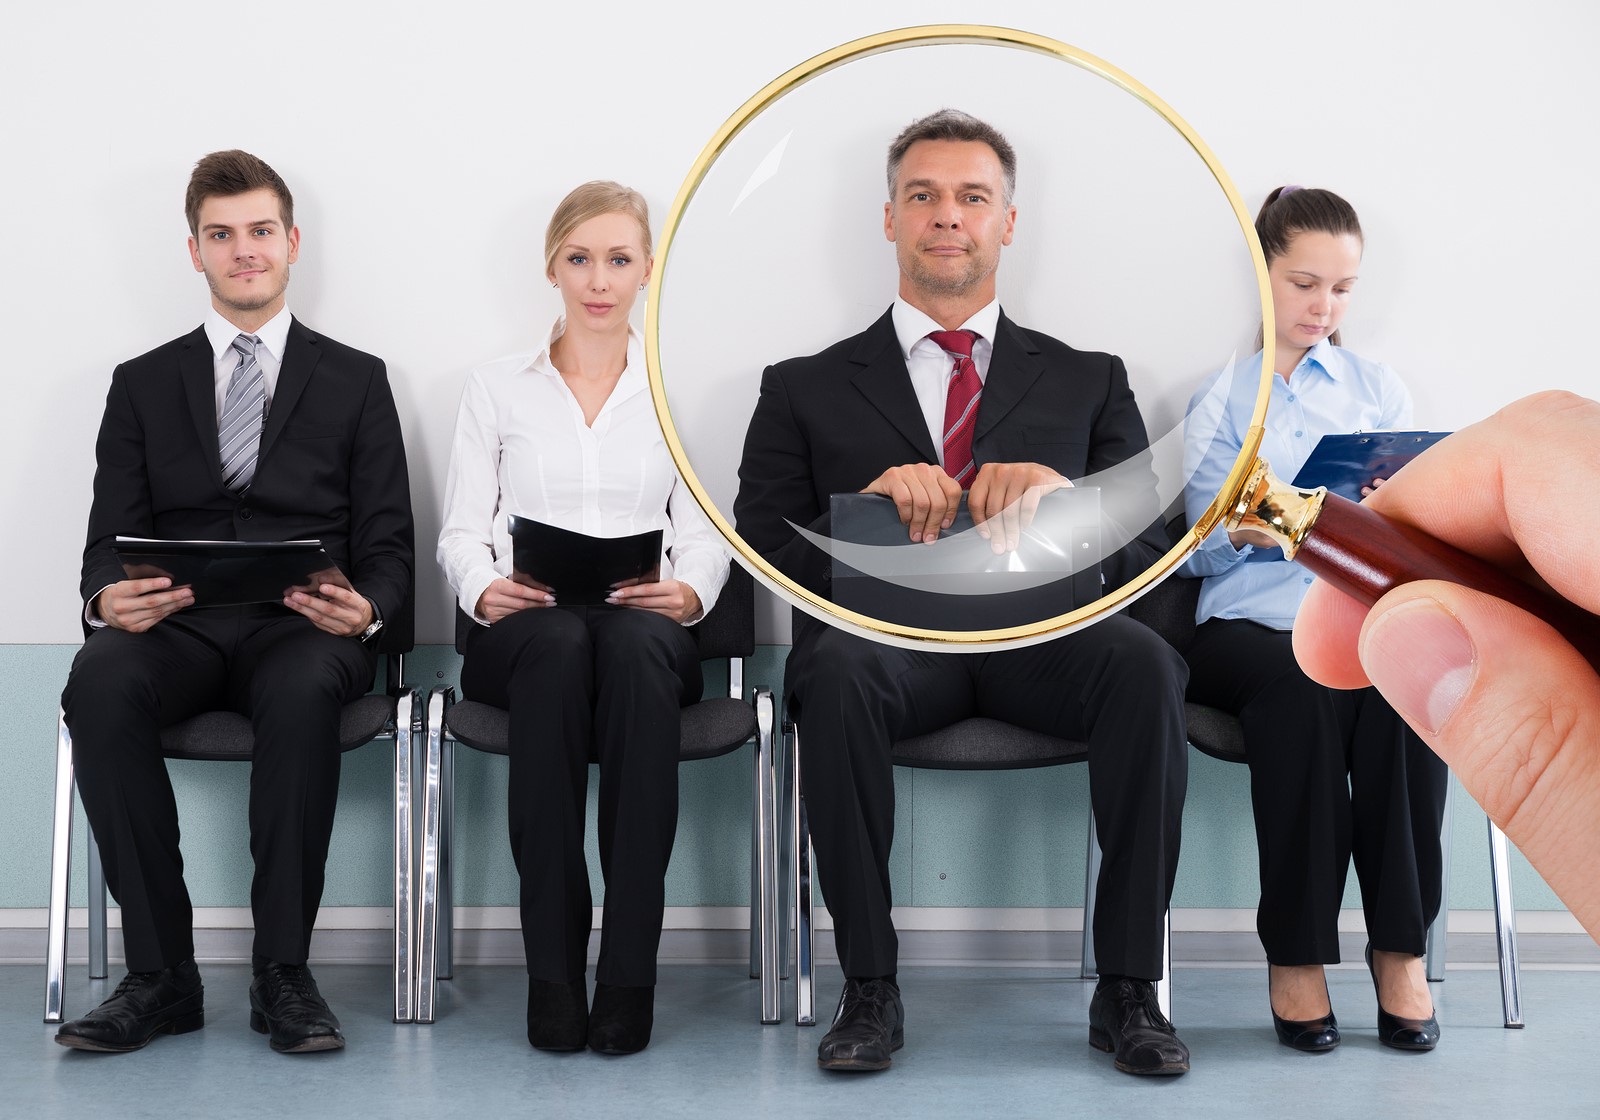 Recruiting Passive Candidates: How to Find Hidden Talent